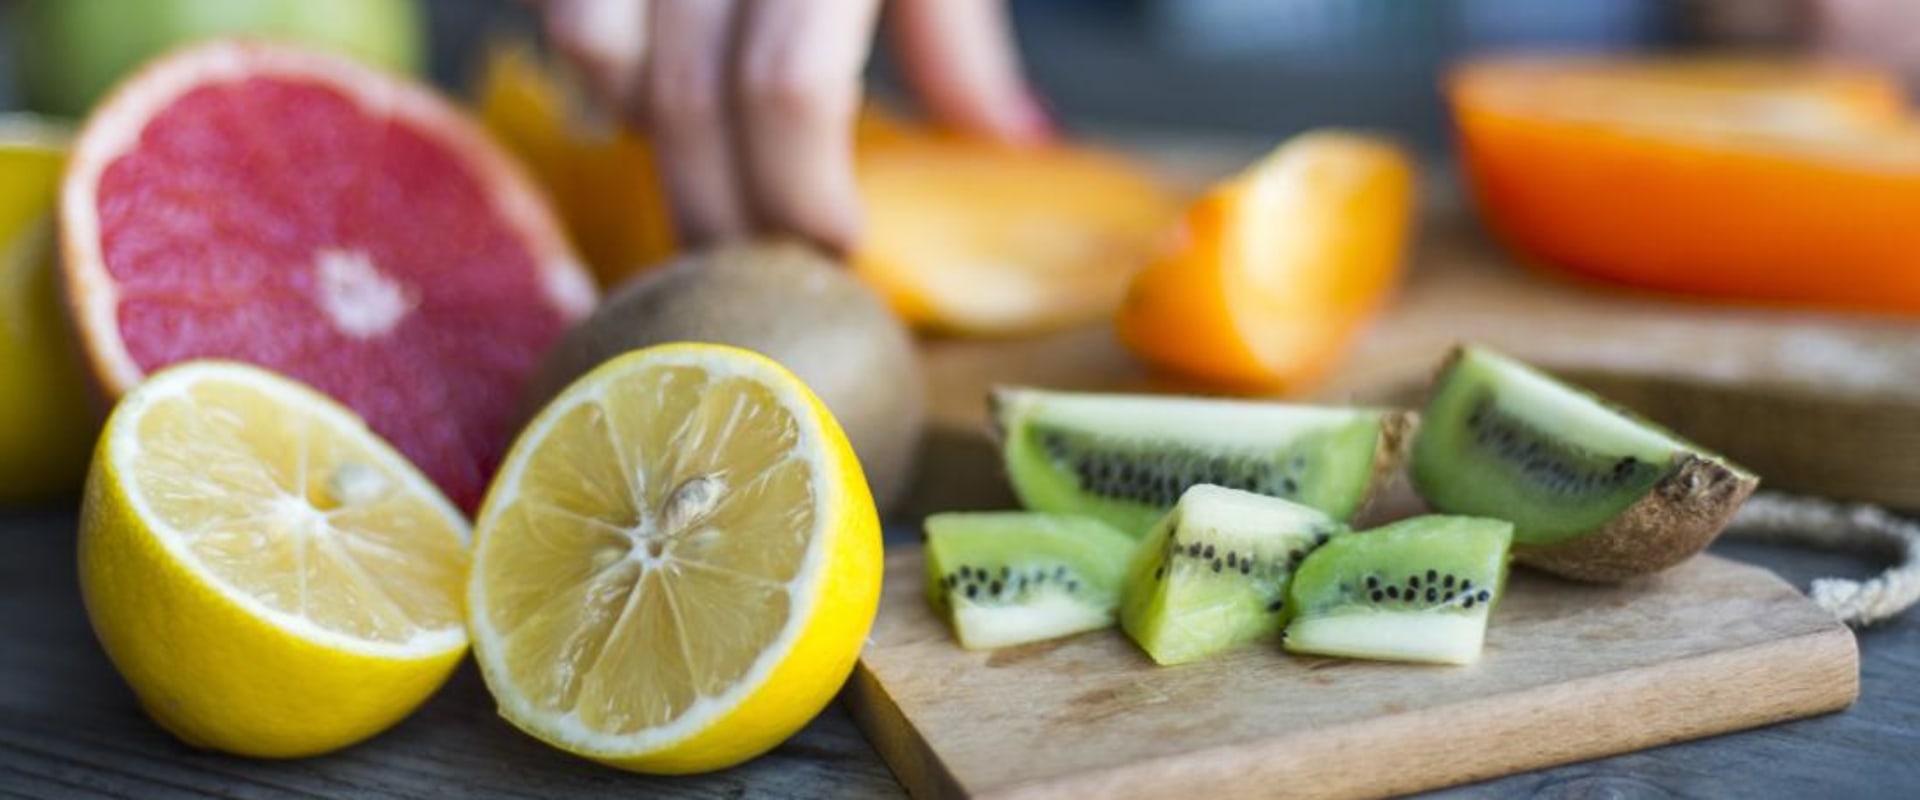 Can i take vitamin c without consulting a doctor?